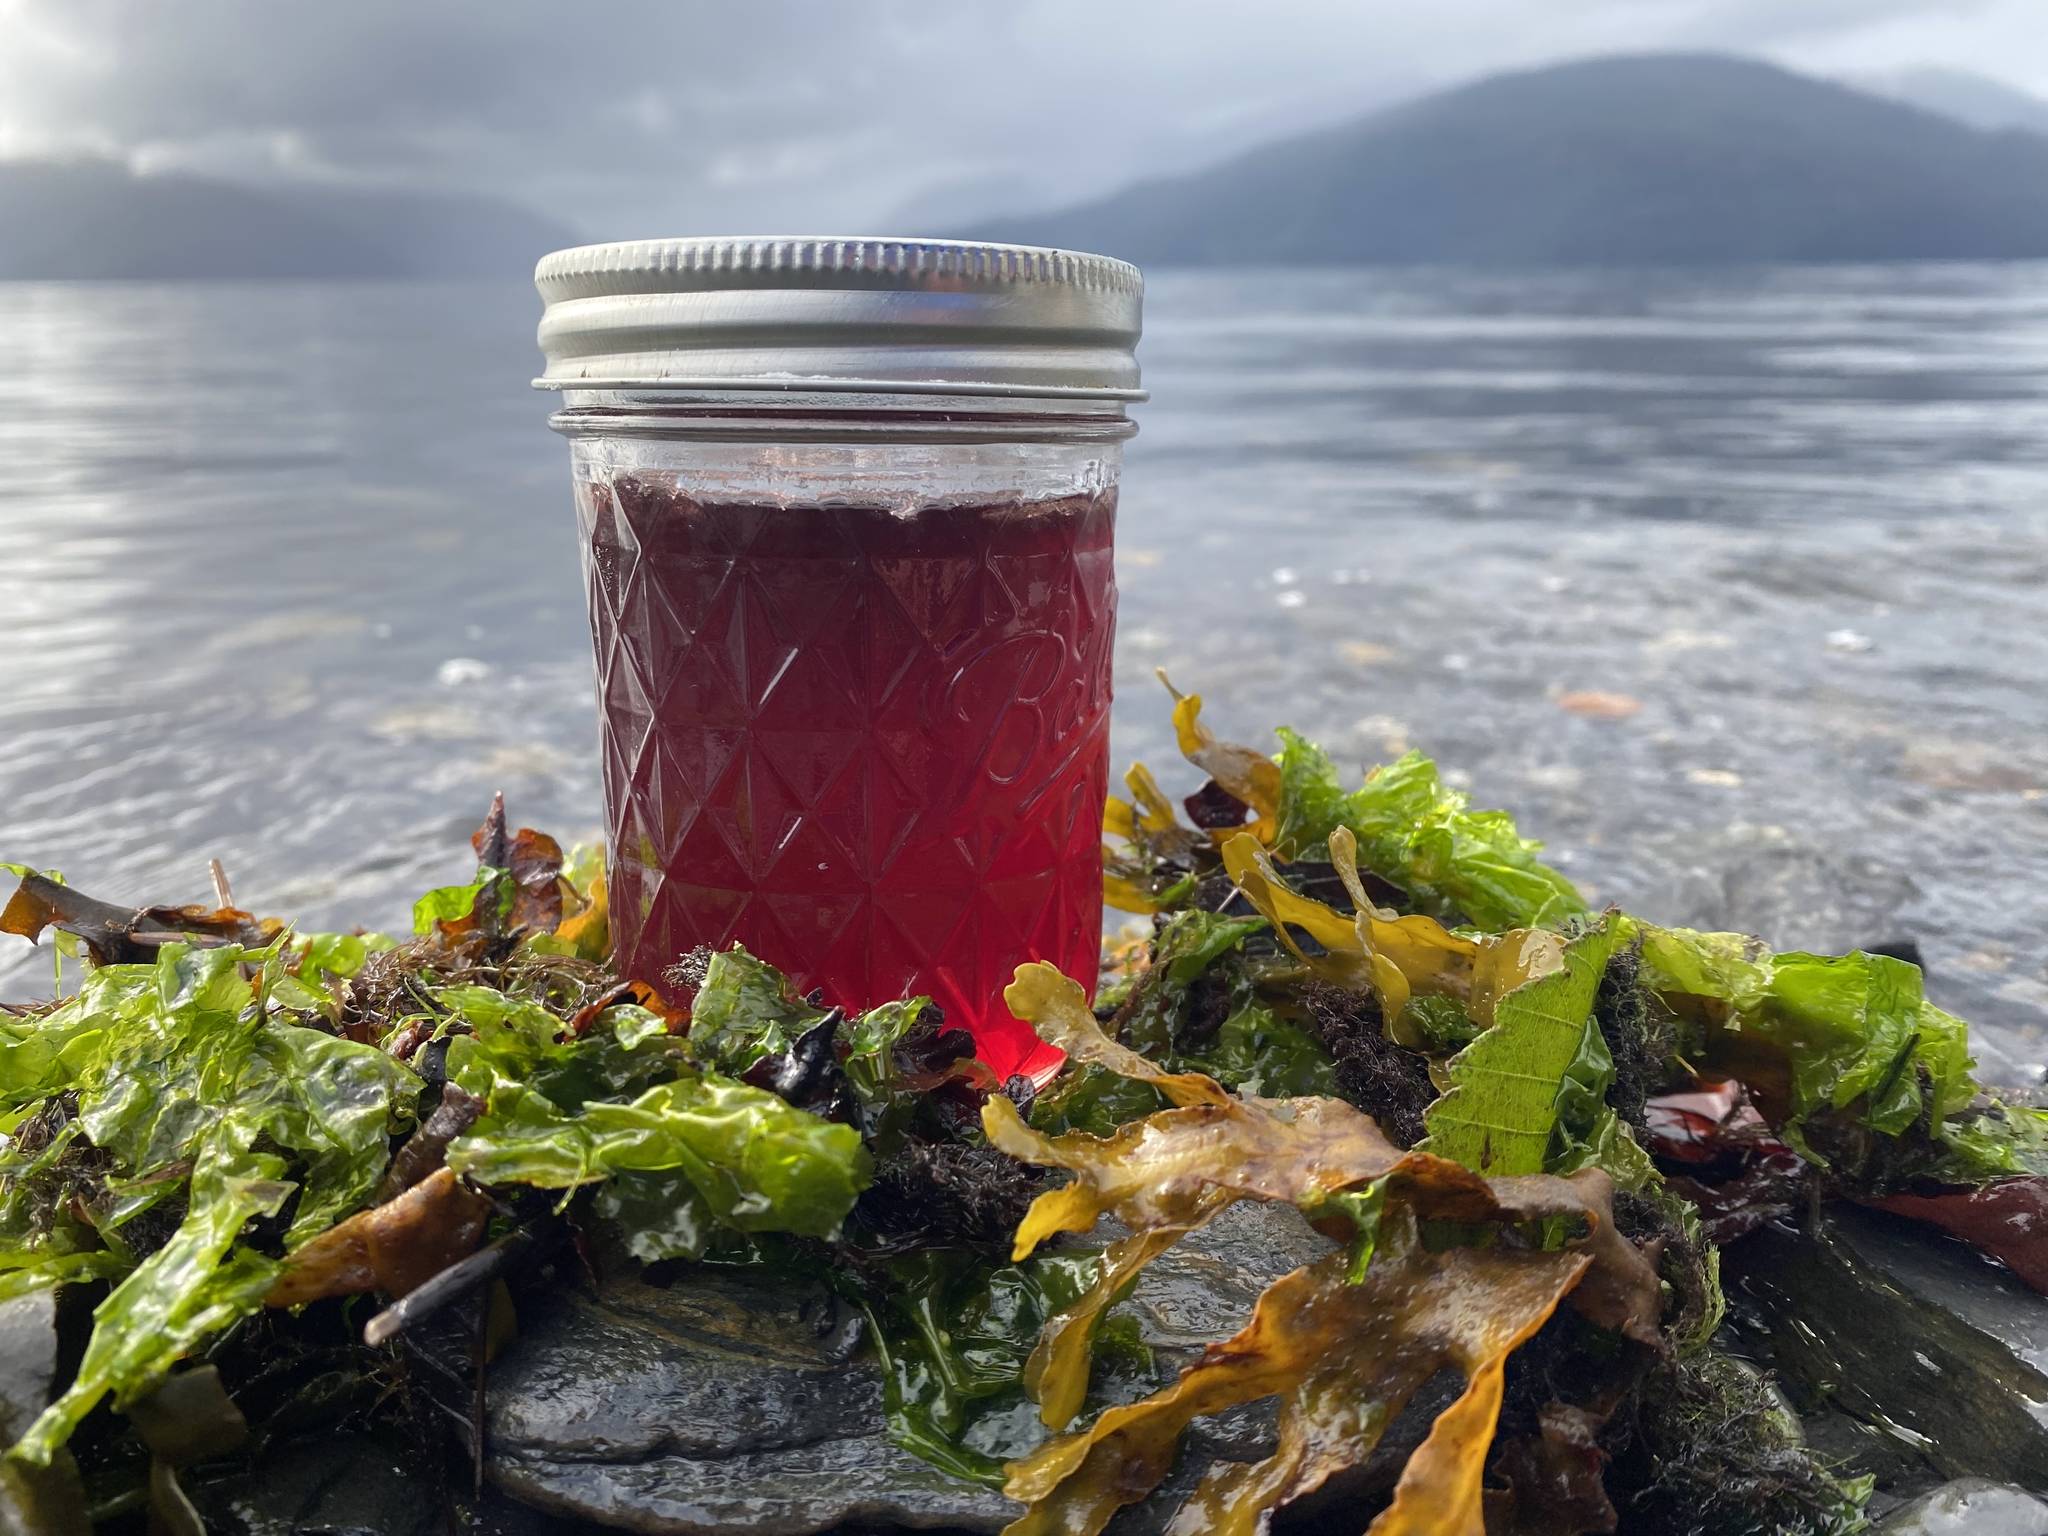 photos by Vivian Faith Prescott / For the Capital City WeeklyThis photo shows a jar holding stink currant jelly in Wrangell.